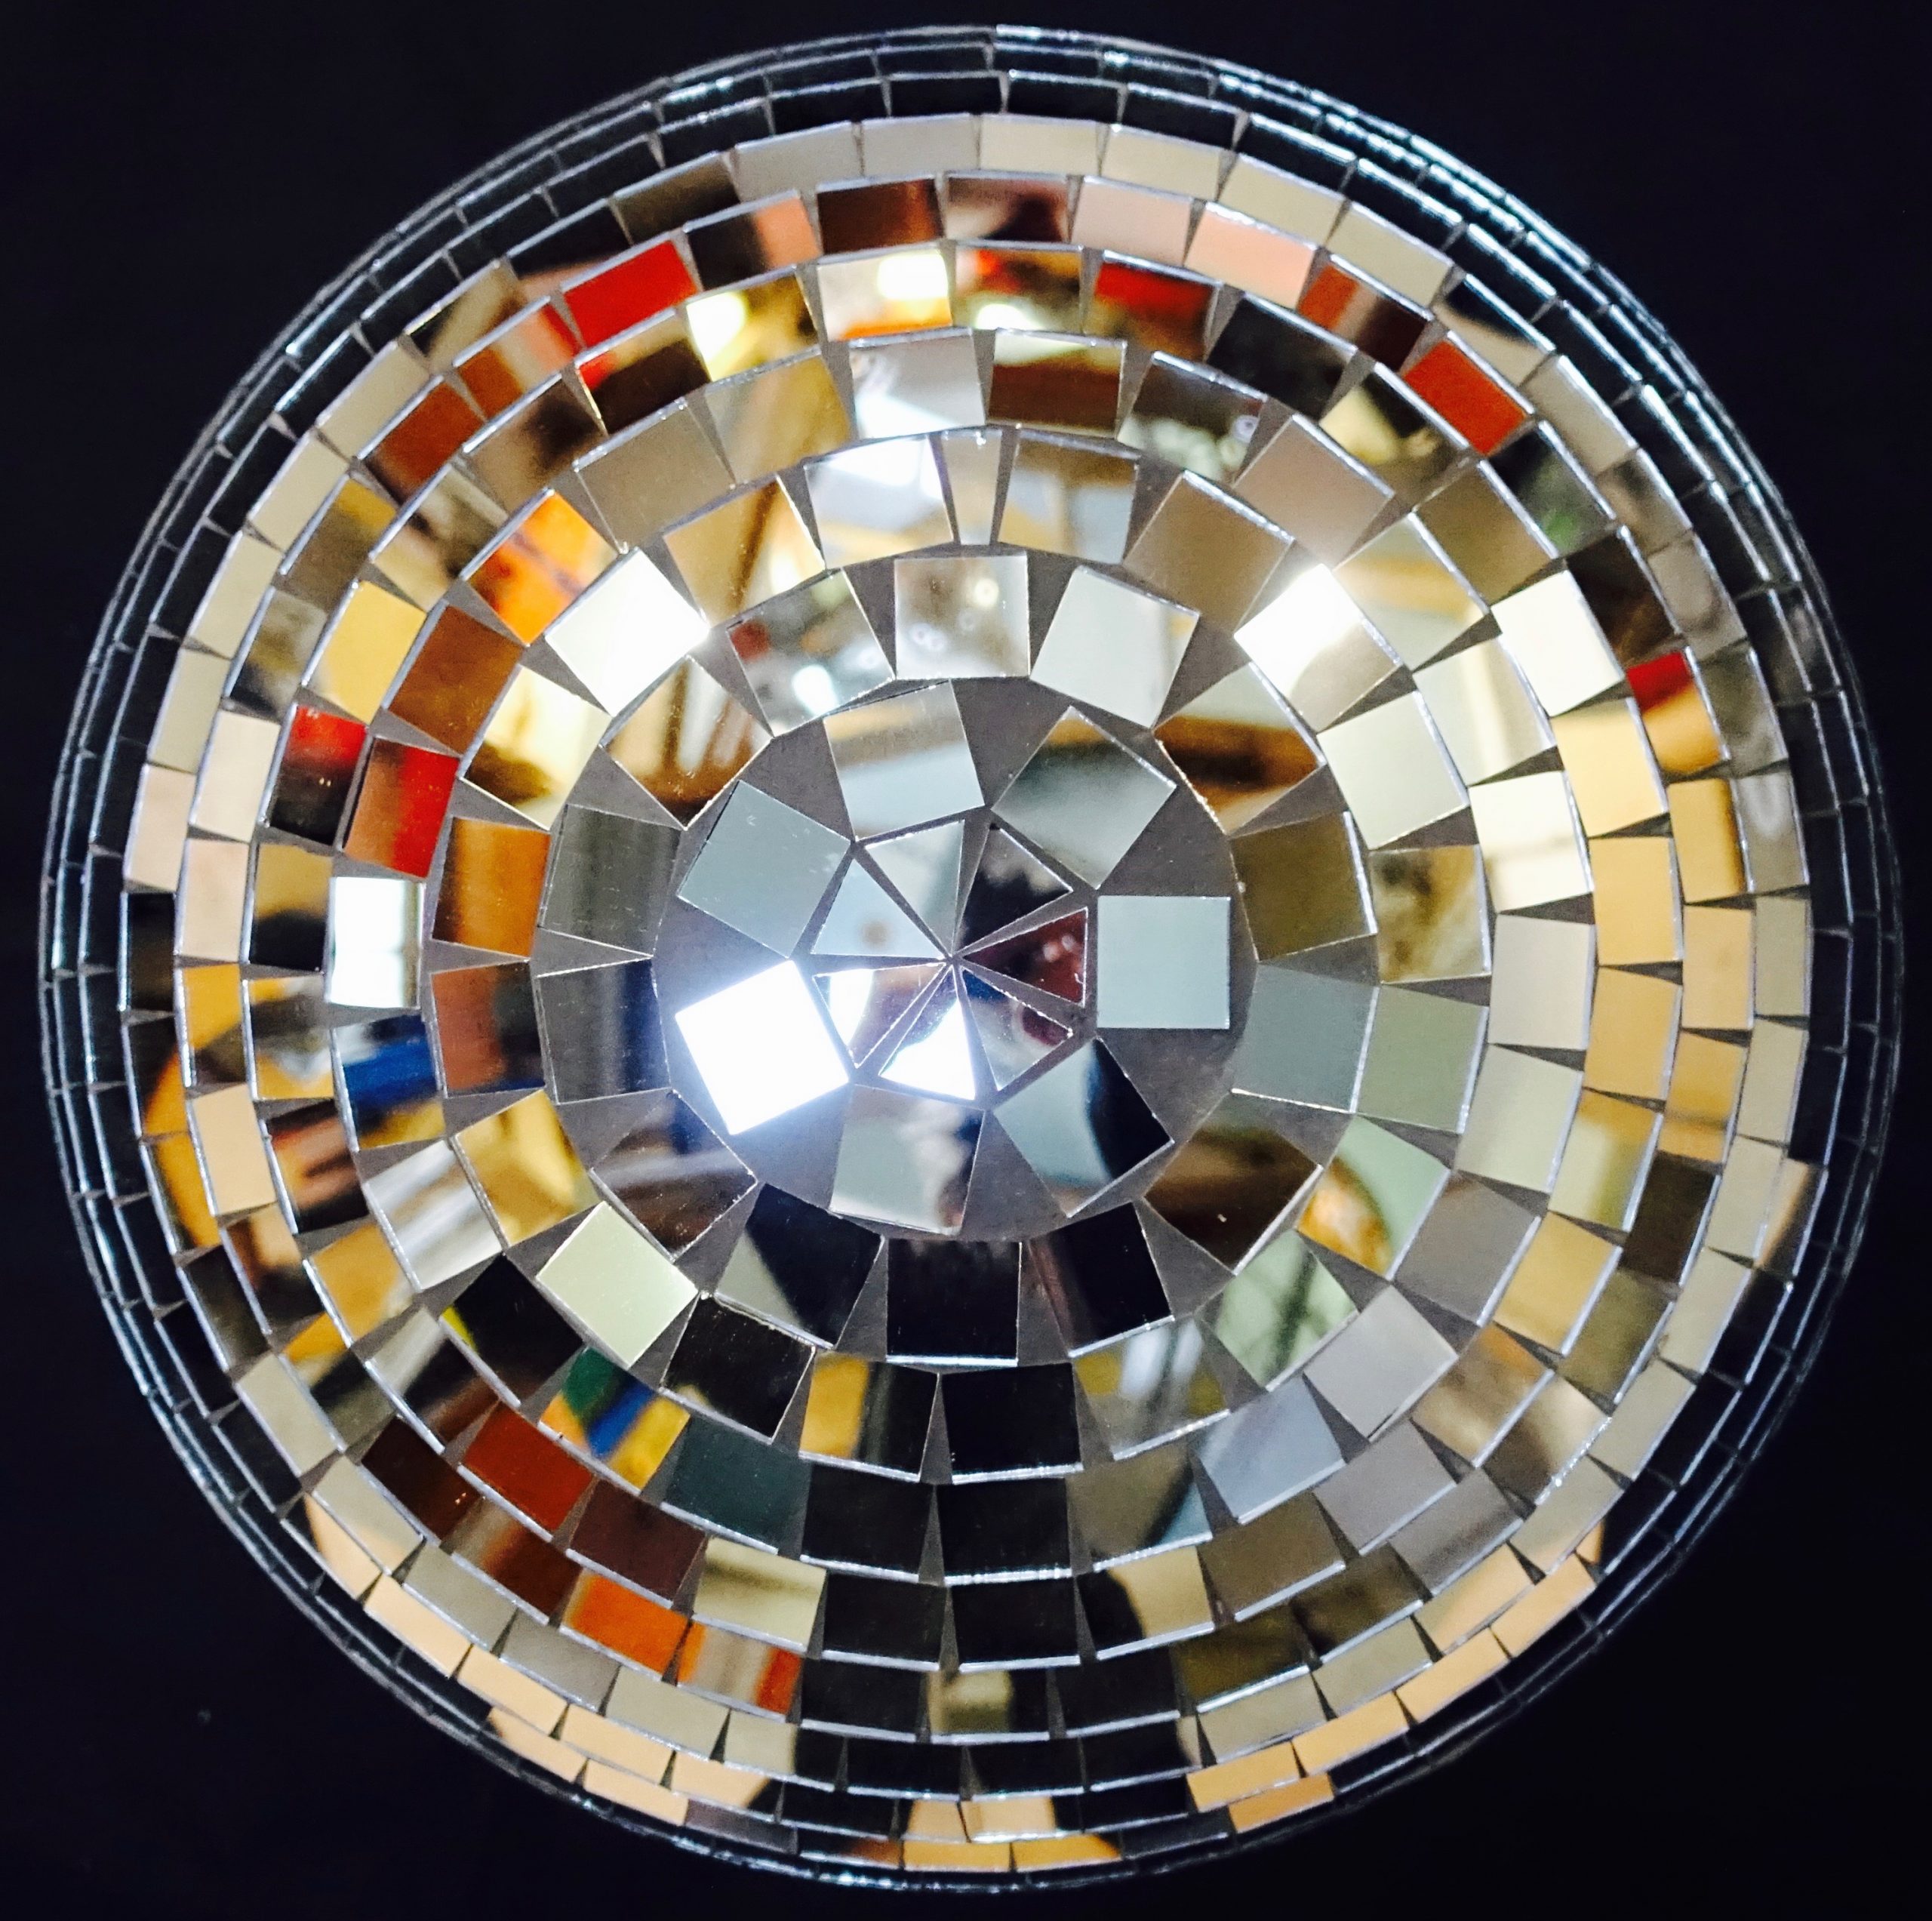 500mm silver mirror ball approx weight 6kg dry hire fee - £70 purchase price - POA